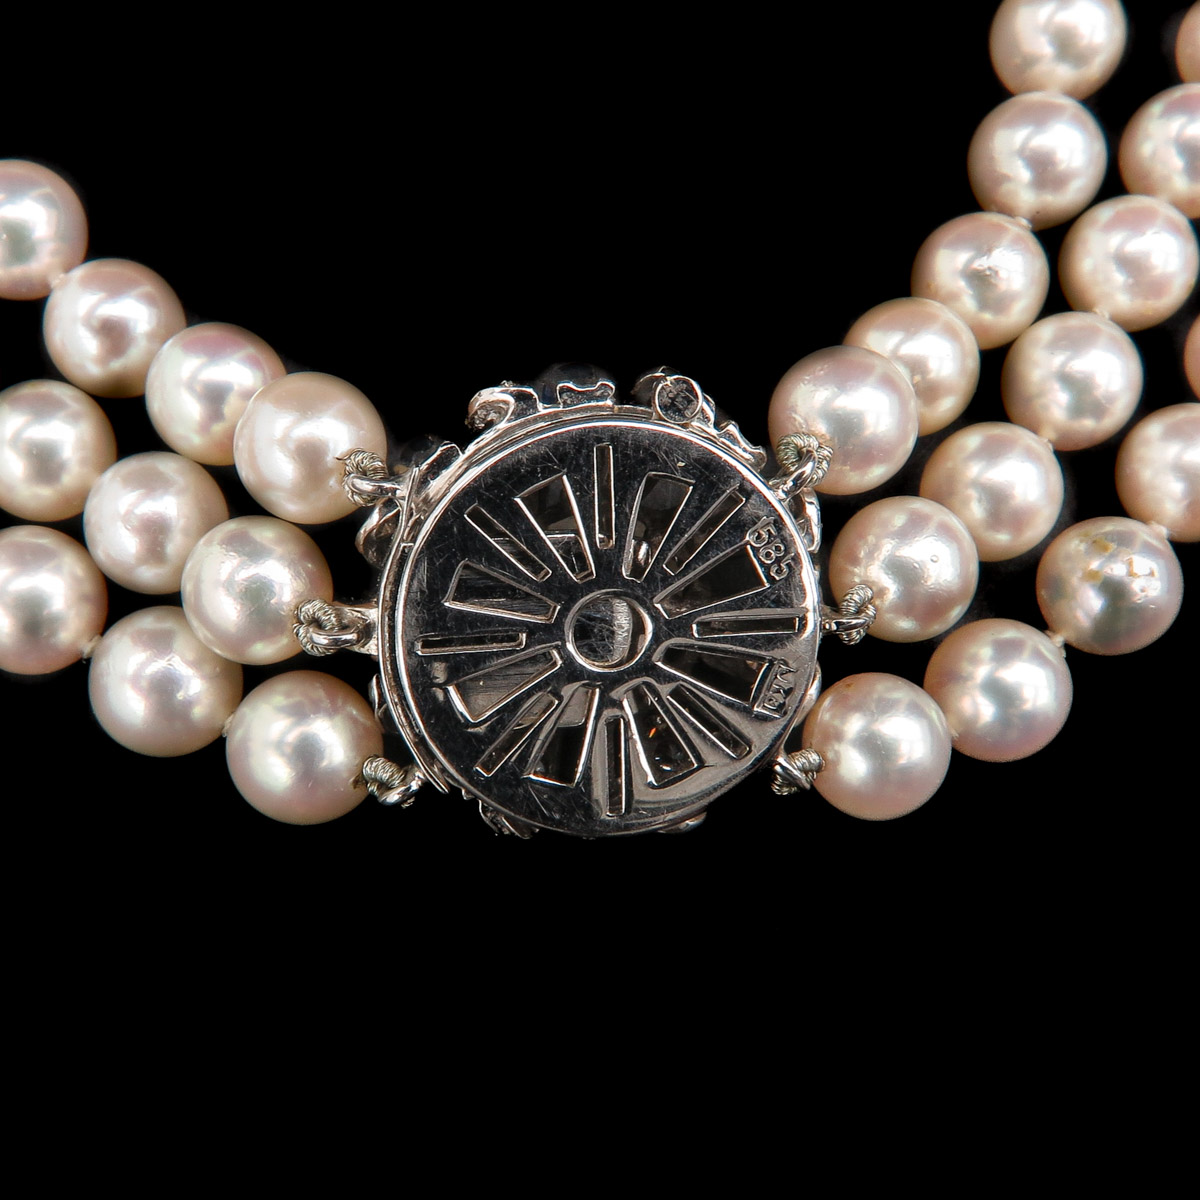 A Set of Pearl Jewelry - Image 10 of 10